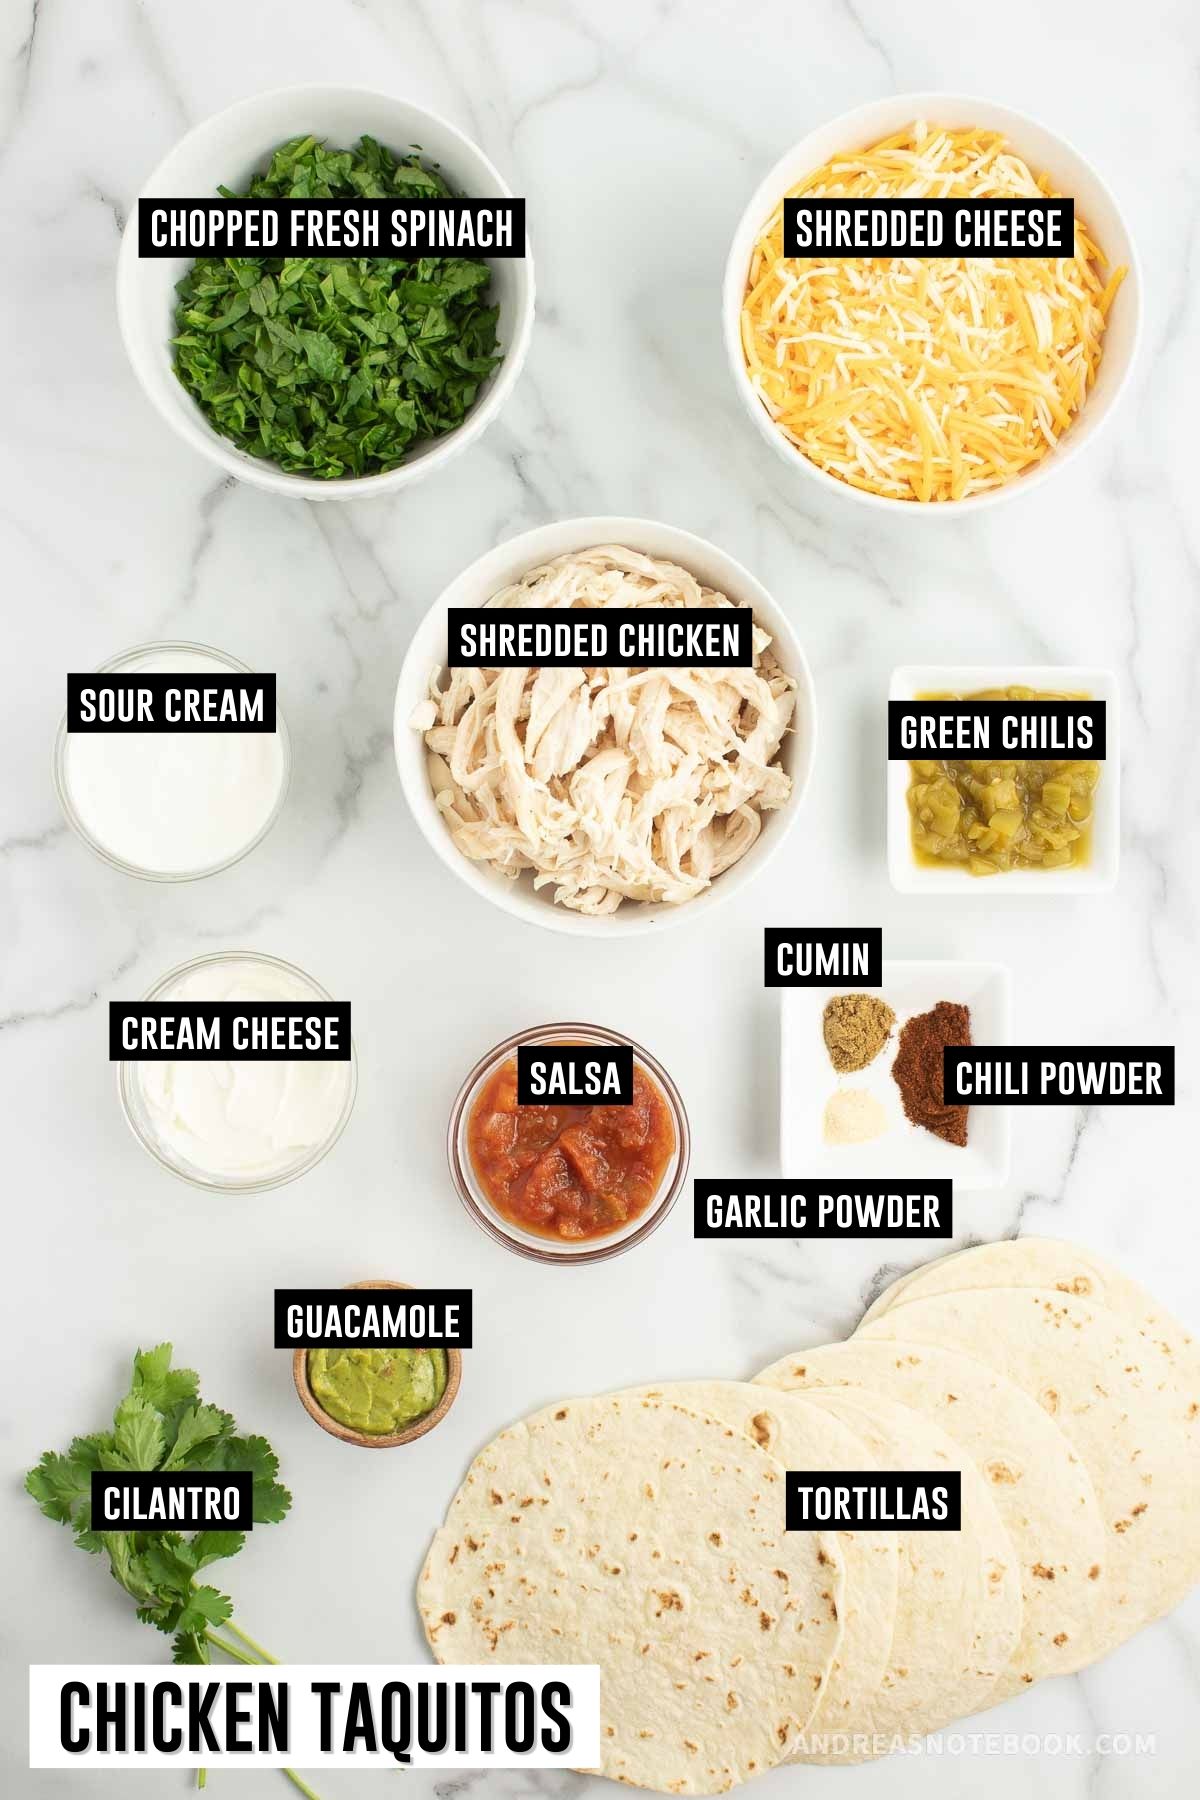 Chicken taquitos ingredients image with labeled ingredients.